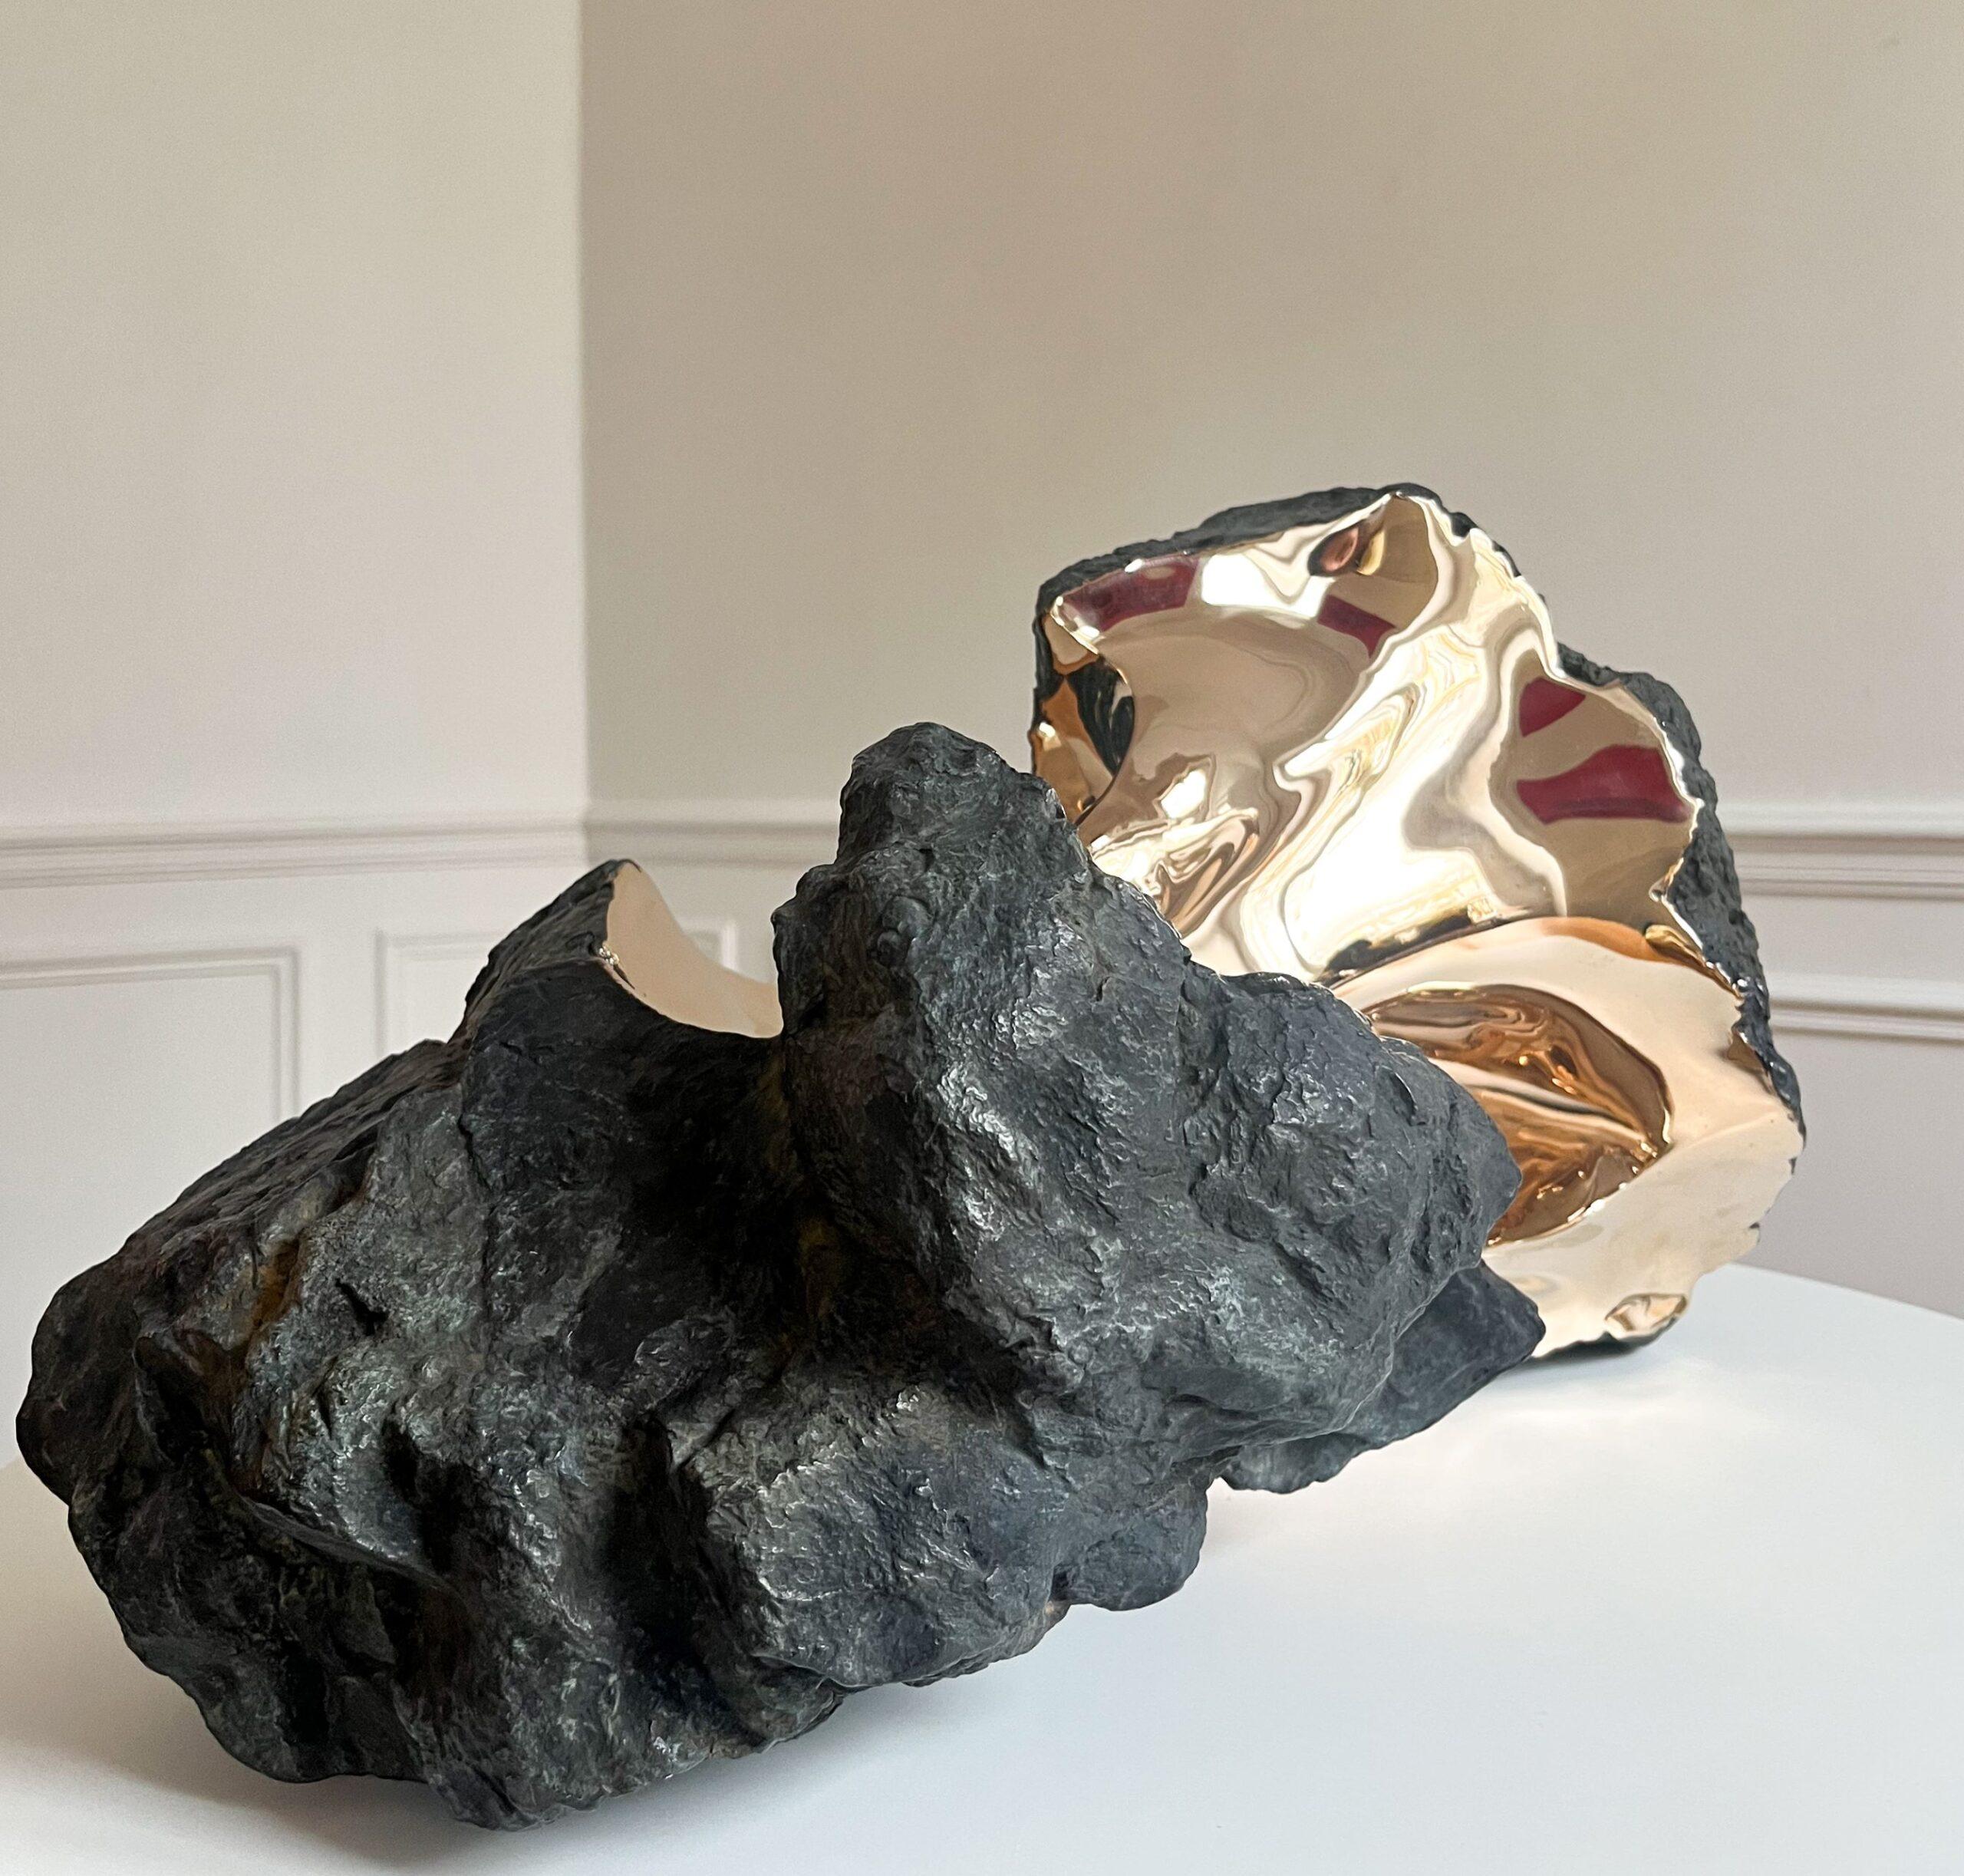 Kairos by Romain Langlois - Rock-like bronze sculpture, golden, abstract For Sale 4